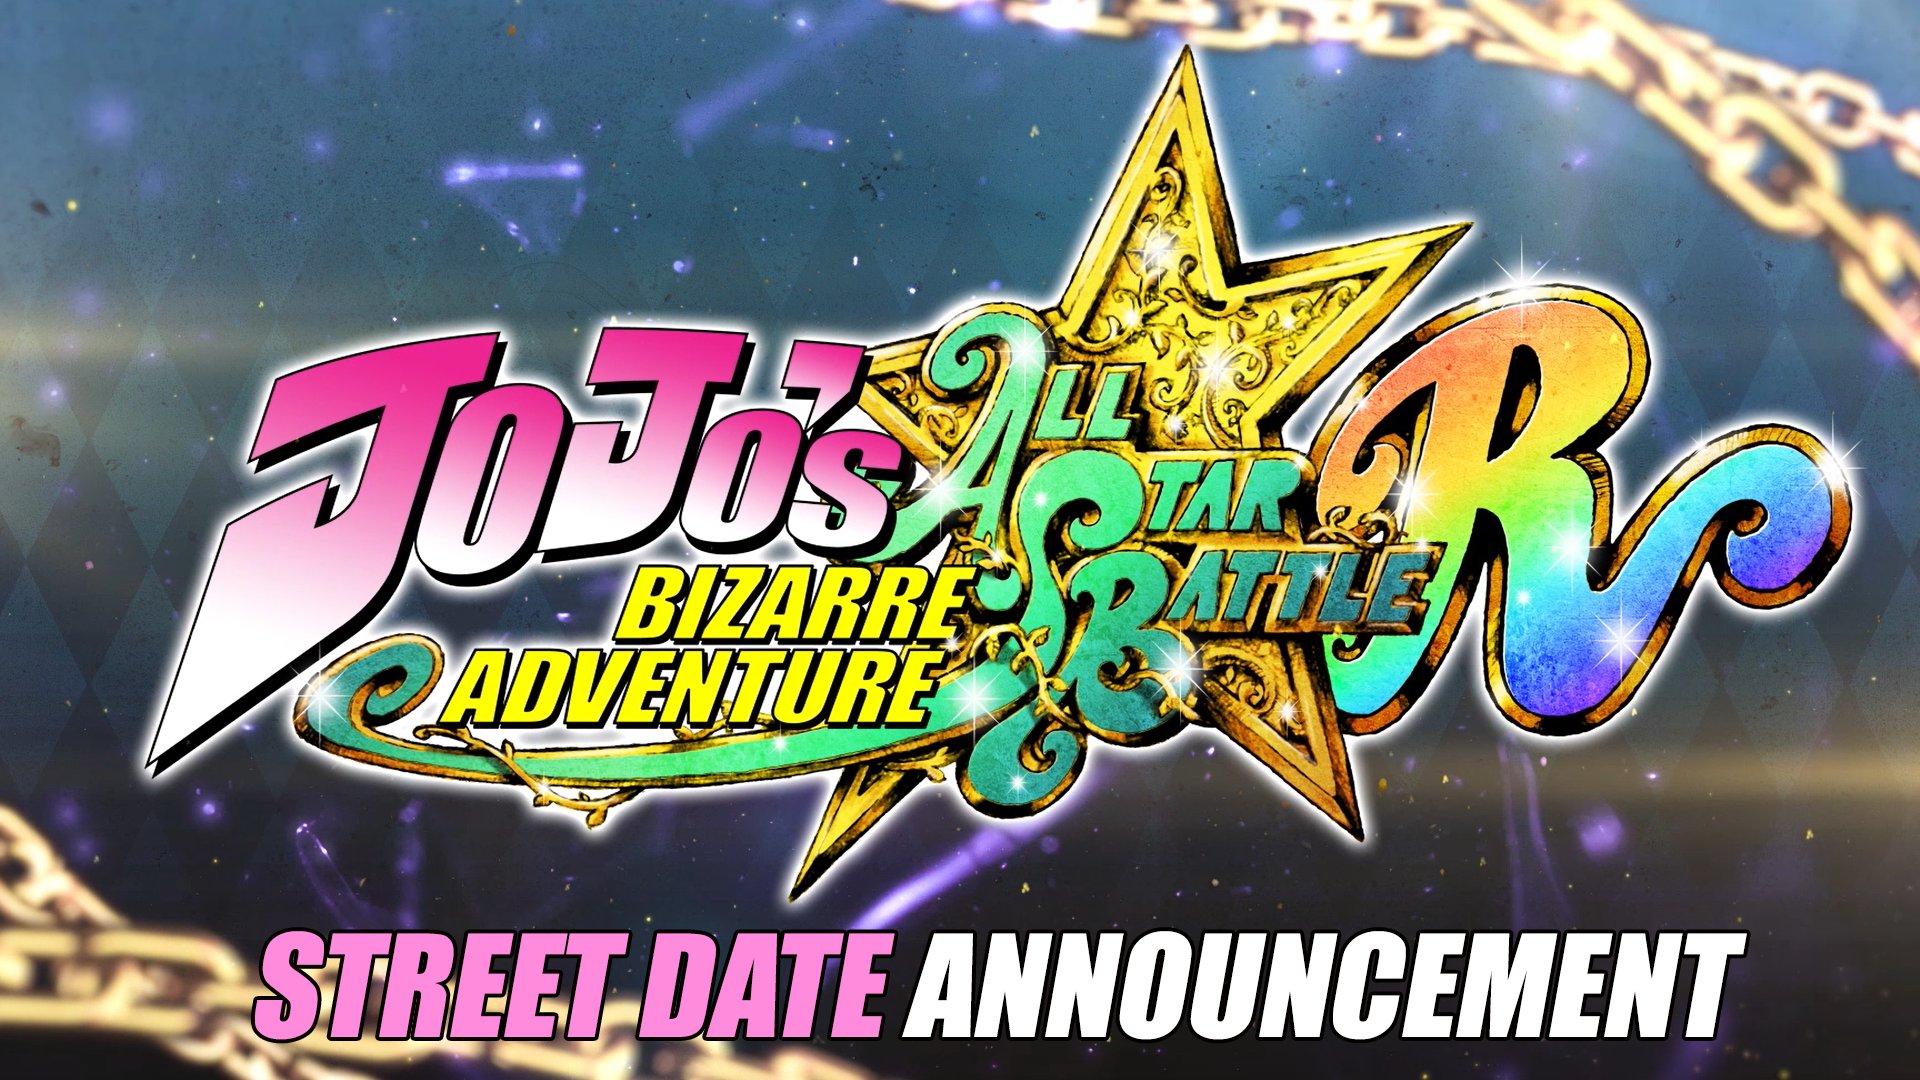 JoJo's Bizarre Adventure: All Star Battle R Order Your Copy Of JoJo's Bizarre Adventure: All Star Battle R Today! With Over 50 Characters From The Series To Choose From, You'll Be Ready